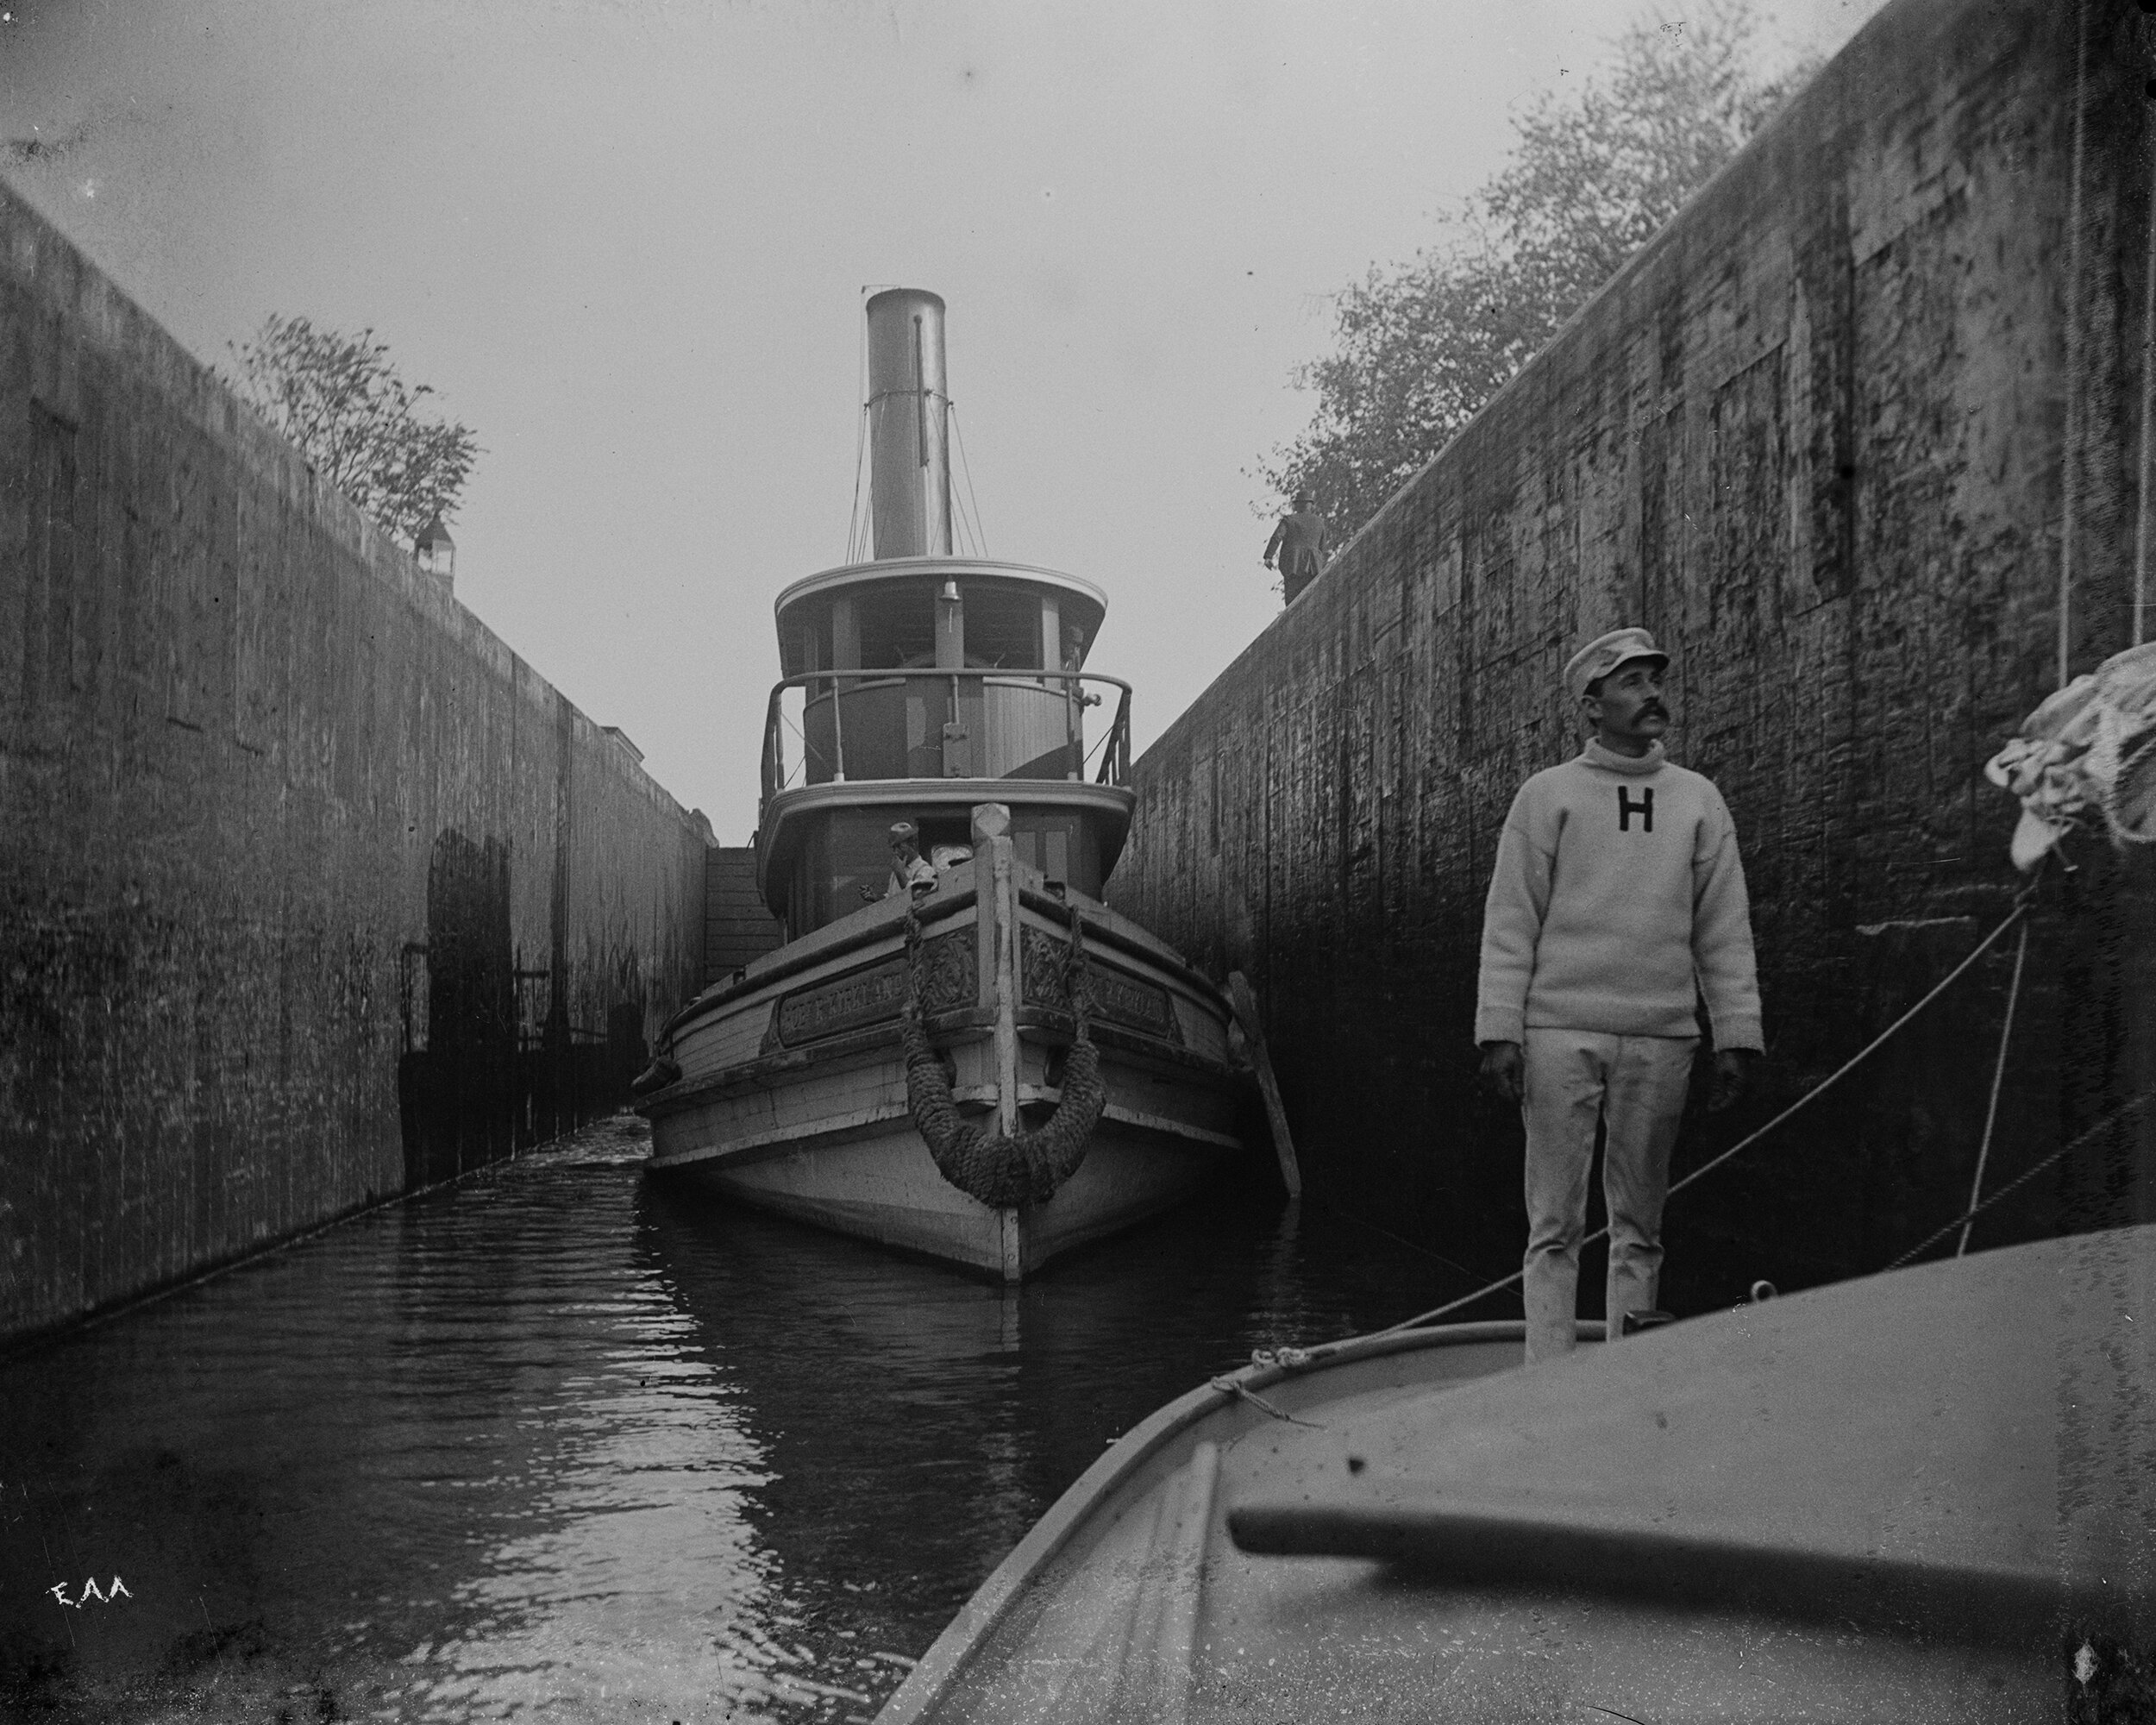   Tugboat in deep lock &amp; Butterball, October 24, 1892  Collection of Historic Richmond Town, 50.015.6226 